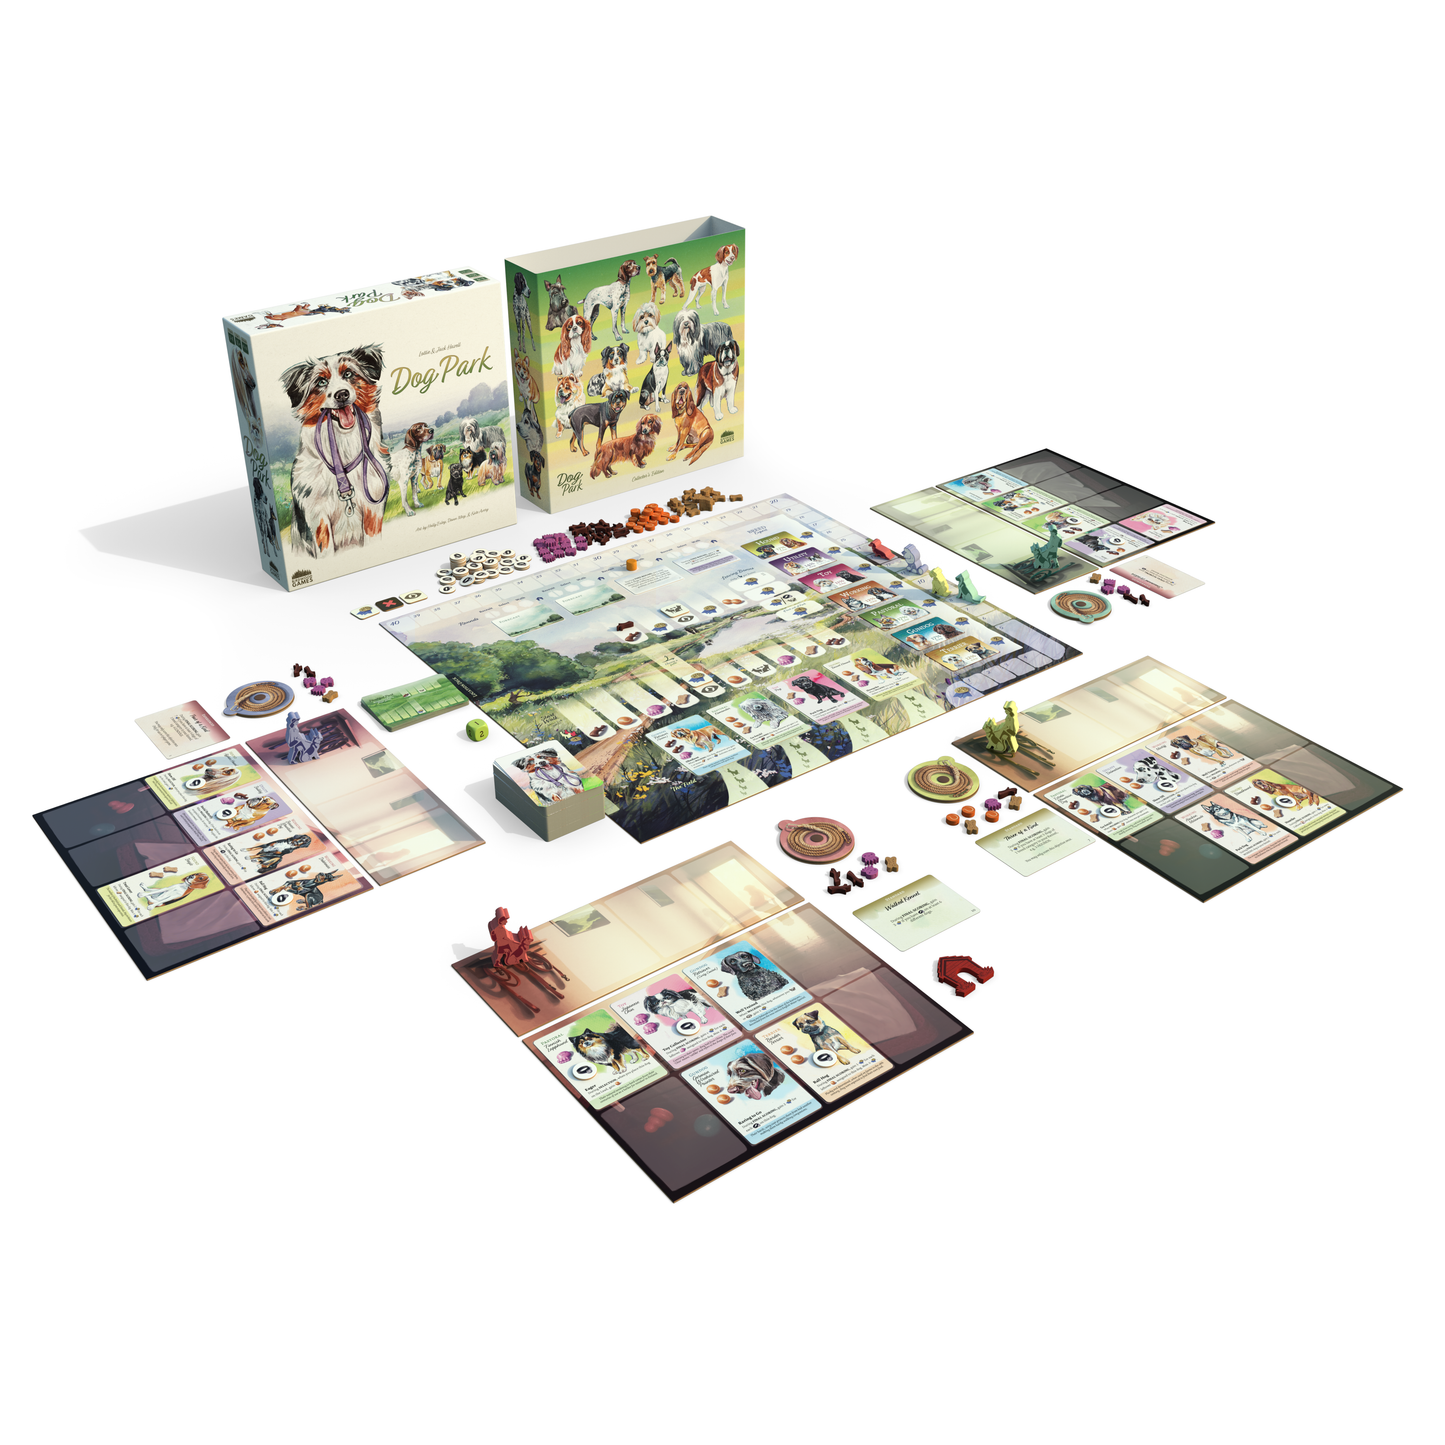 Dog Park Collectors Edition Overview